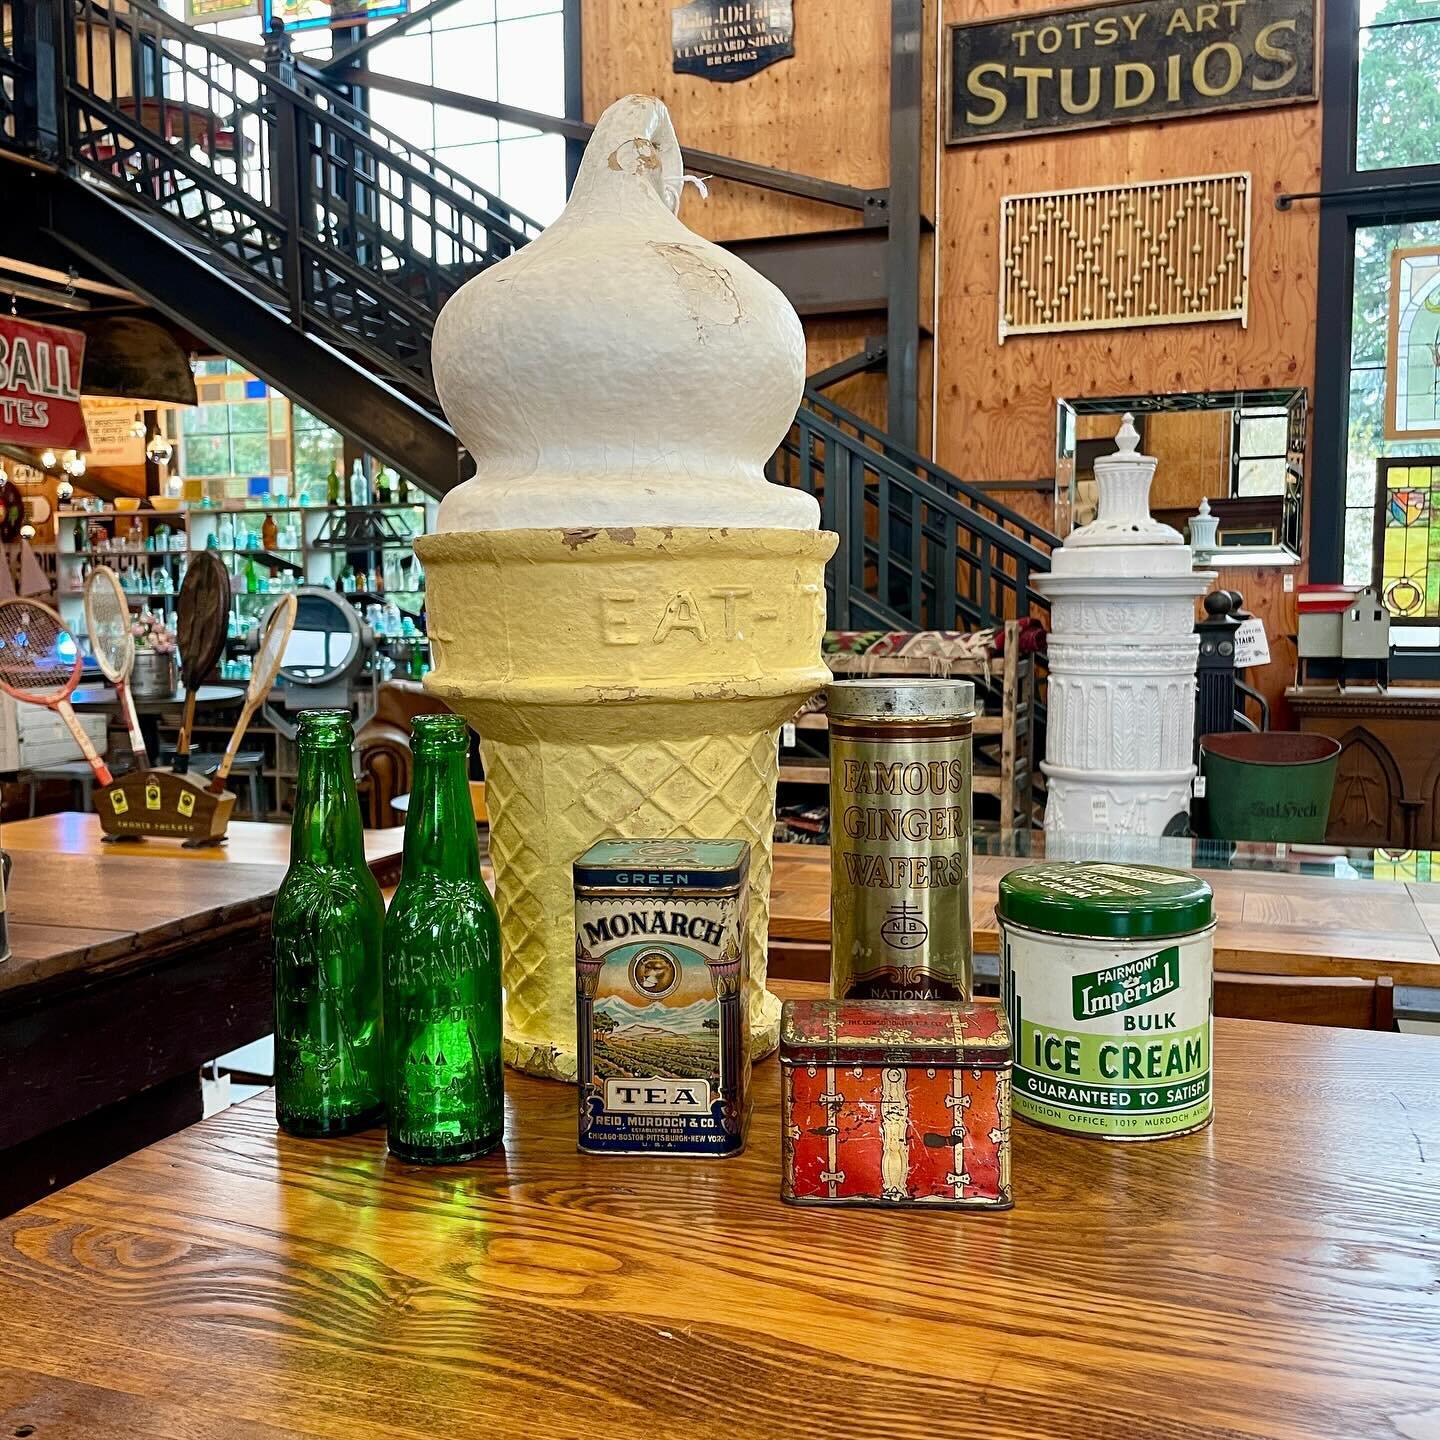 *As seen in stories* Cute little goodies all over the shop. Help these items find their new home!! 
.
-Ginger ale bottles: $12 ea
-Ginger wafers tin: $22
-Monarch Tea tin: $60
-Trunk tea tin: $18
-Ice Cream tin: $40
.
OPEN FOR THE WEEKEND!! 
FRI/SAT/